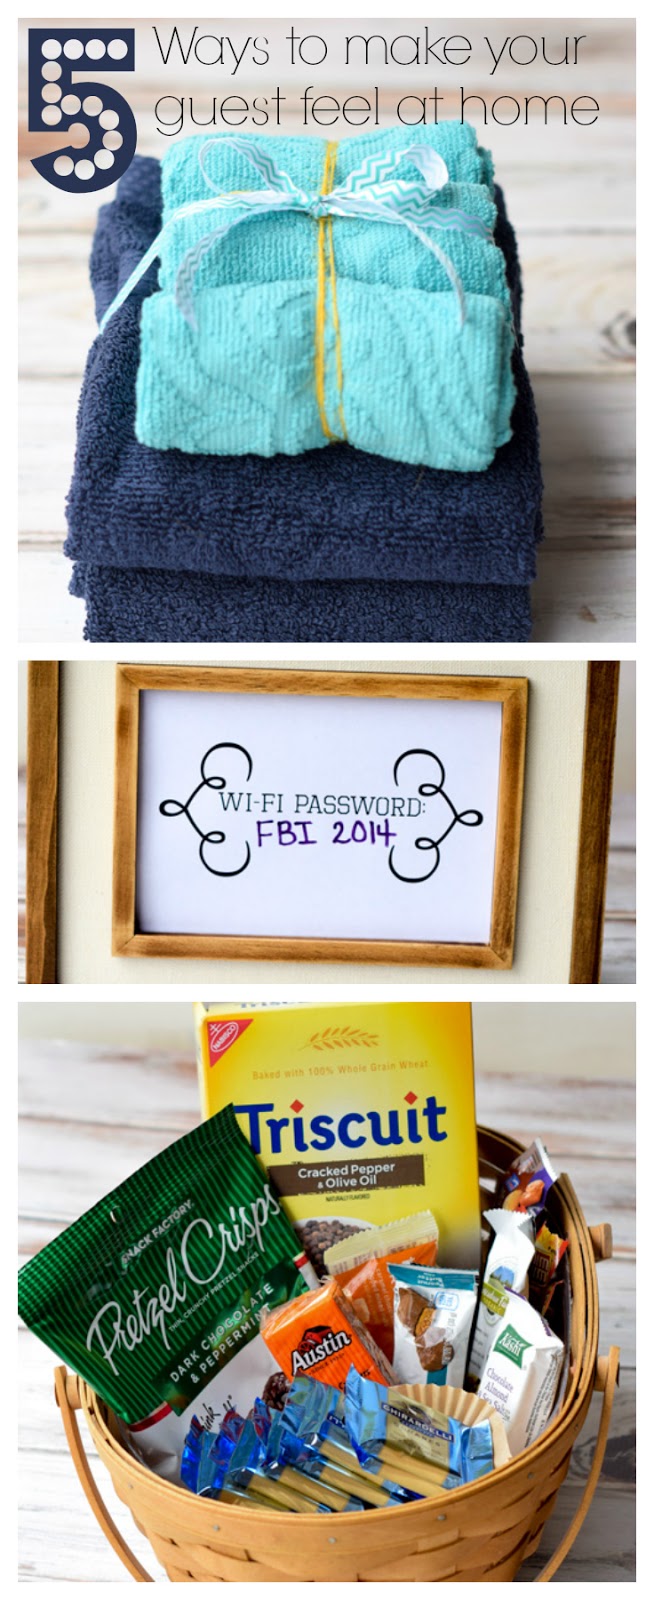 A list of 5 tips to make an overnight guest feel at home. Includes fresh towels and toiletries, snacks, coffee and more! Learn about getting your house ready for guests (or the holidays!) with a Bissell Deep Clean Upright Cleaner & Bissell Deep Cleaning Formulas with Scotchgard Protector. Includes a giveaway for a fabulous Bissell machine! #sp #ad #giveaway #cleaning #holidays